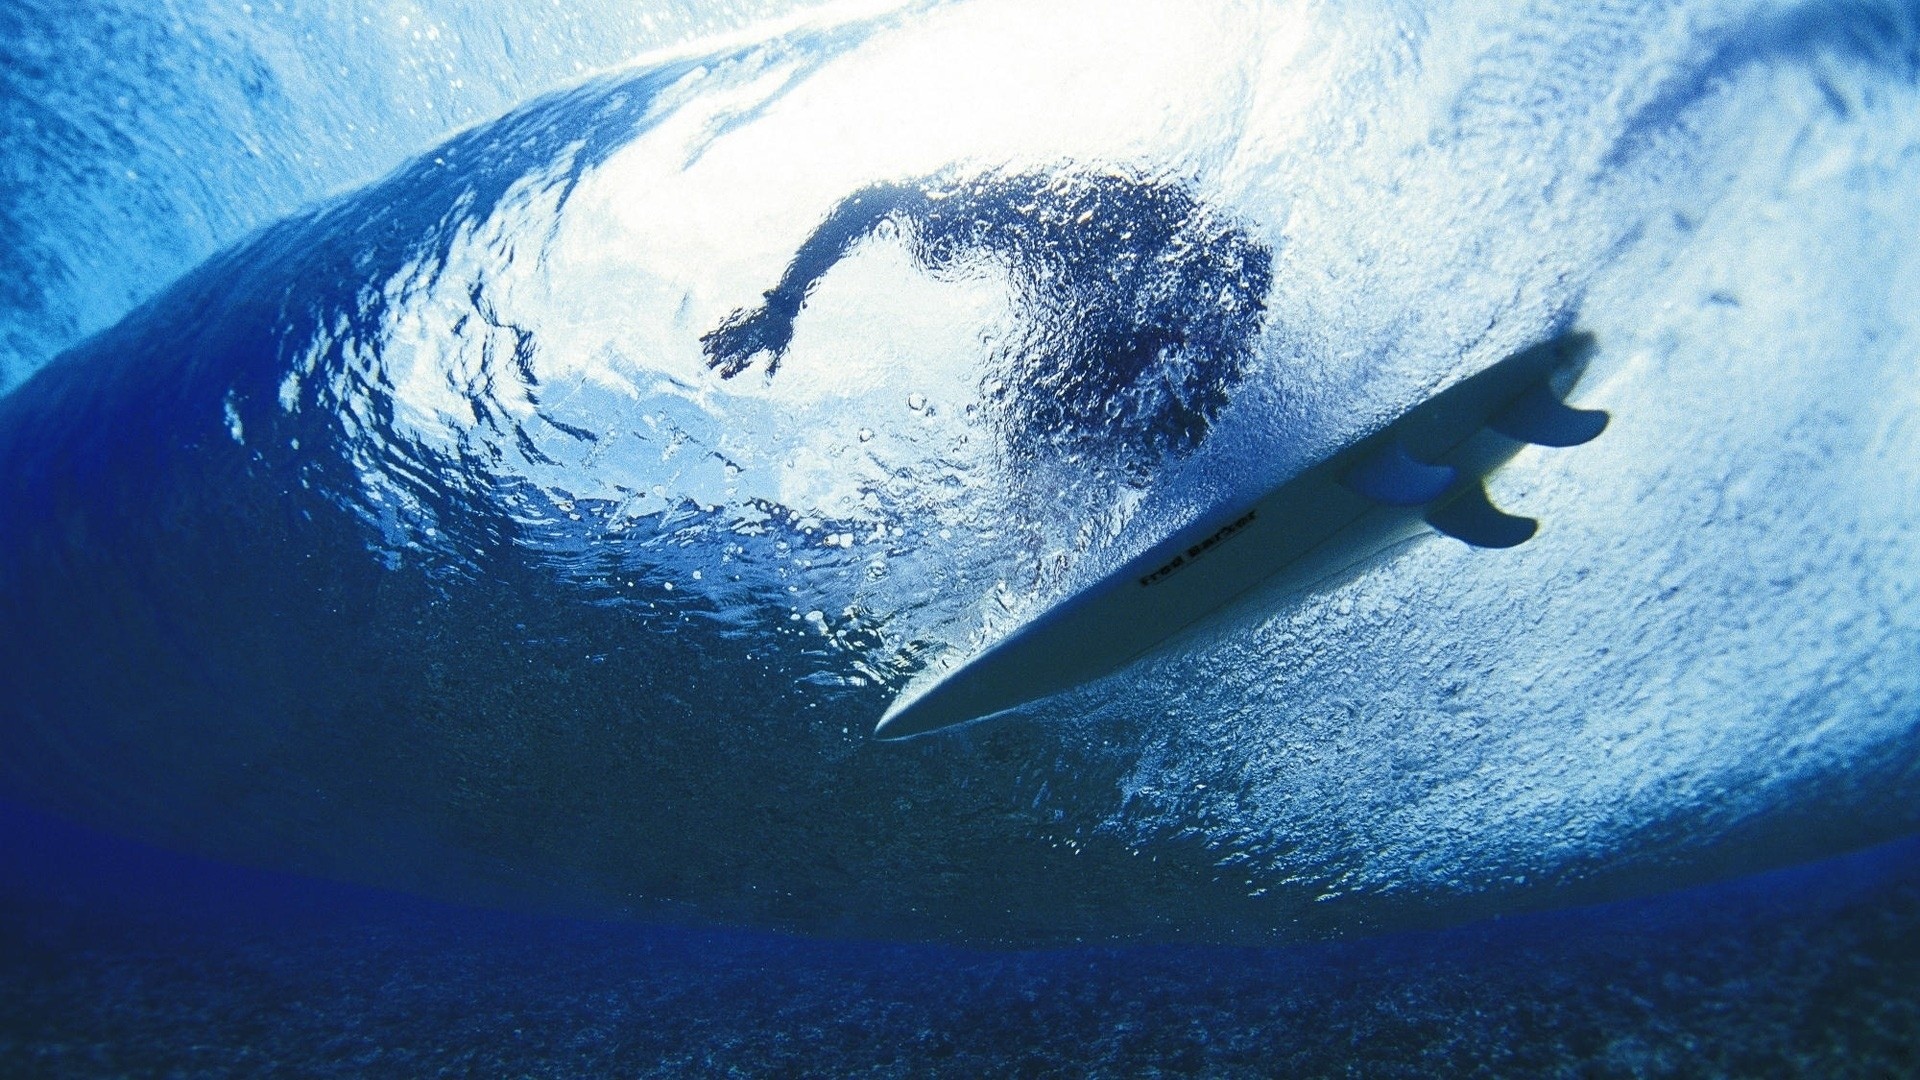 Preview wallpaper surfing, surfer, water, depth 1920×1080